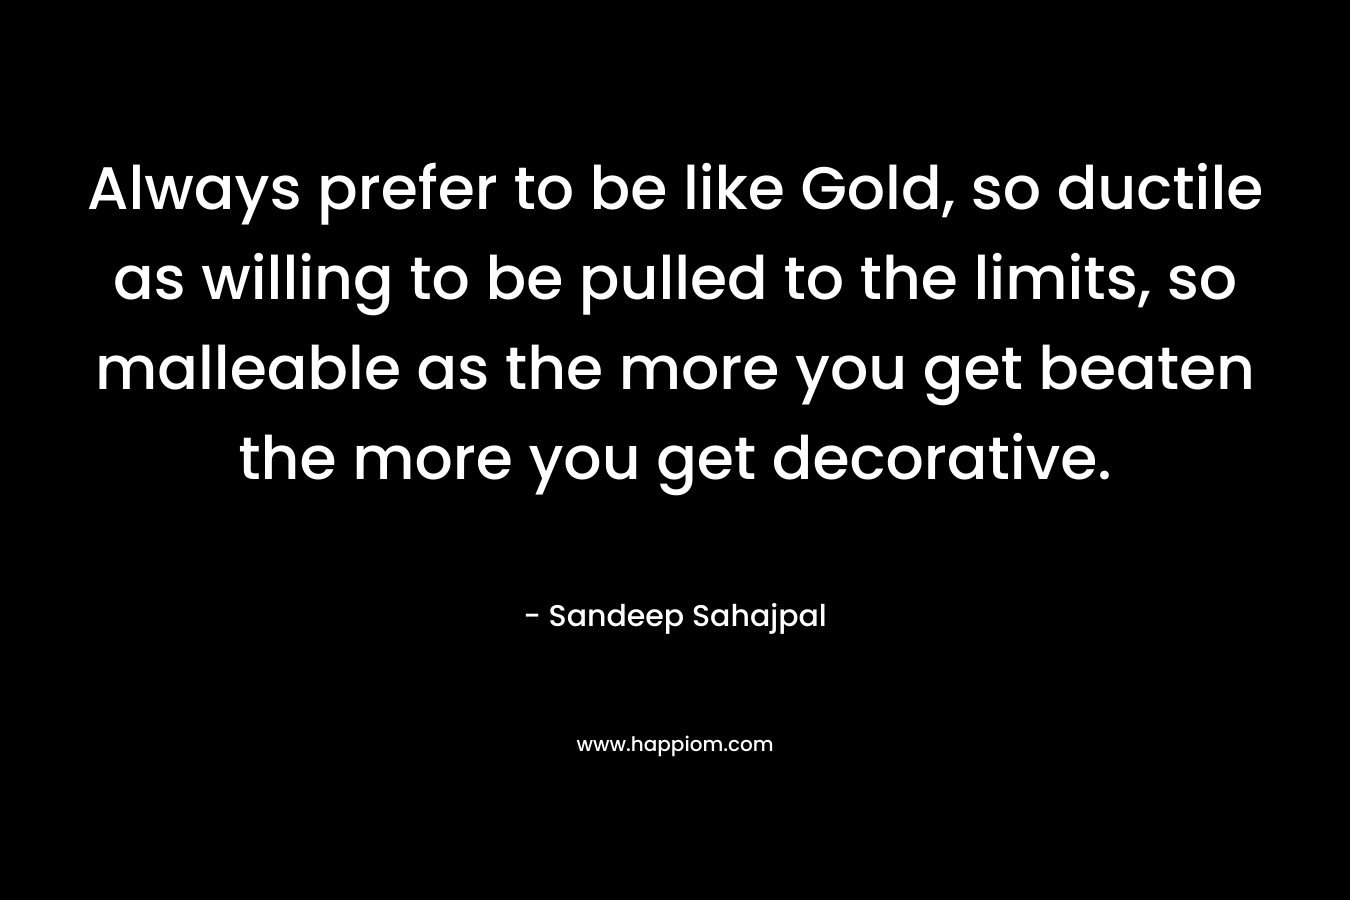 Always prefer to be like Gold, so ductile as willing to be pulled to the limits, so malleable as the more you get beaten the more you get decorative. – Sandeep Sahajpal